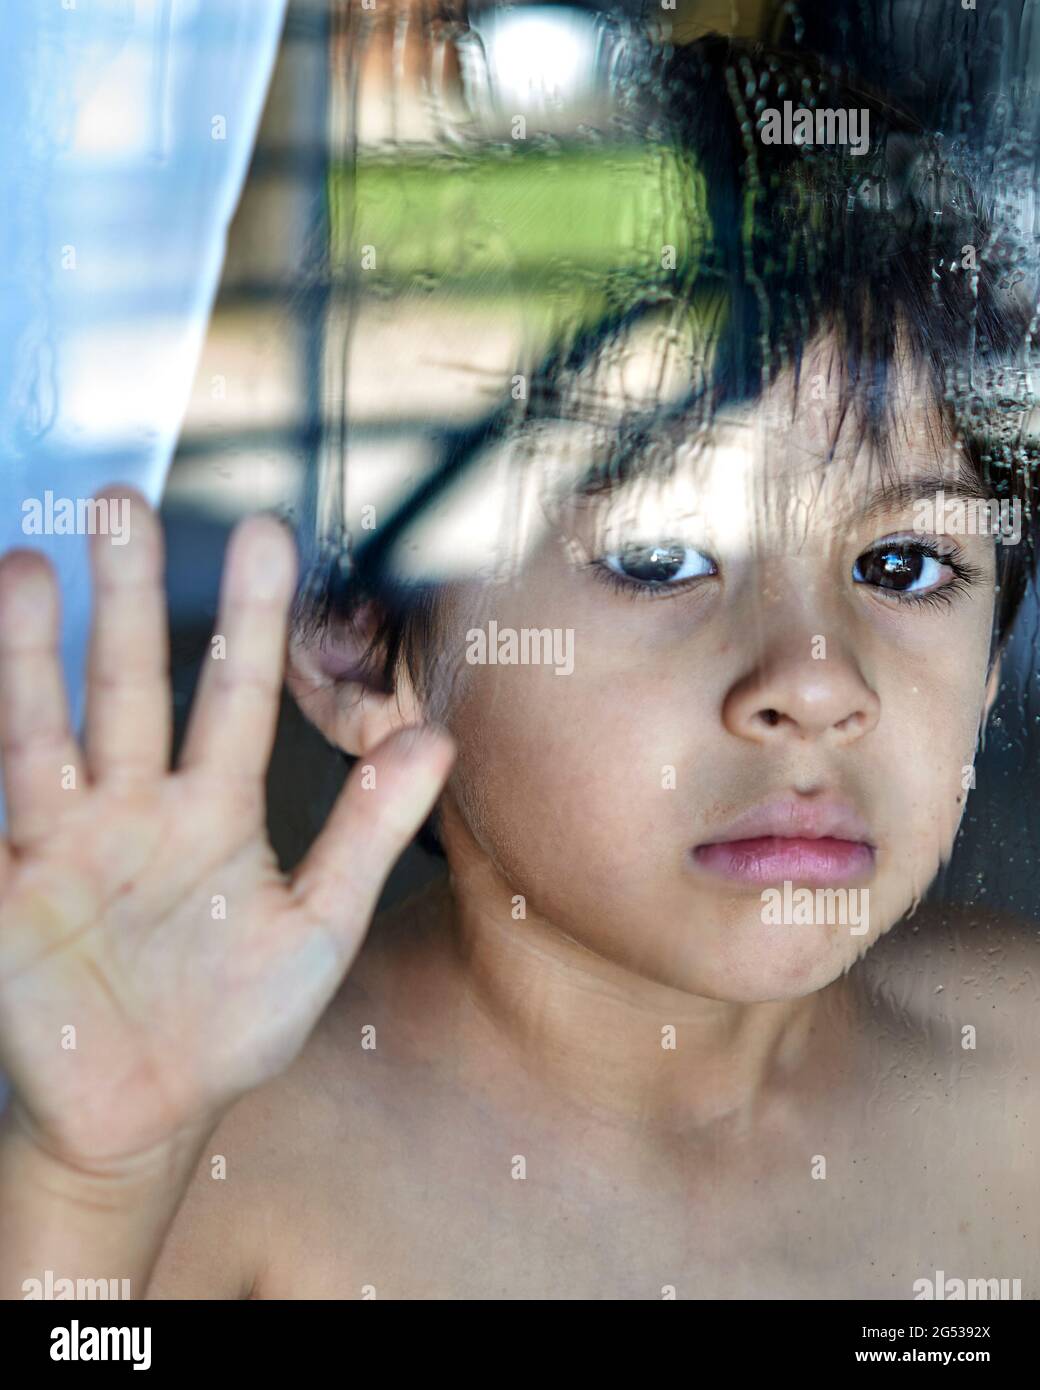 Title sad and anguished child looking behind the wet glass with hand resting on the window Stock Photo